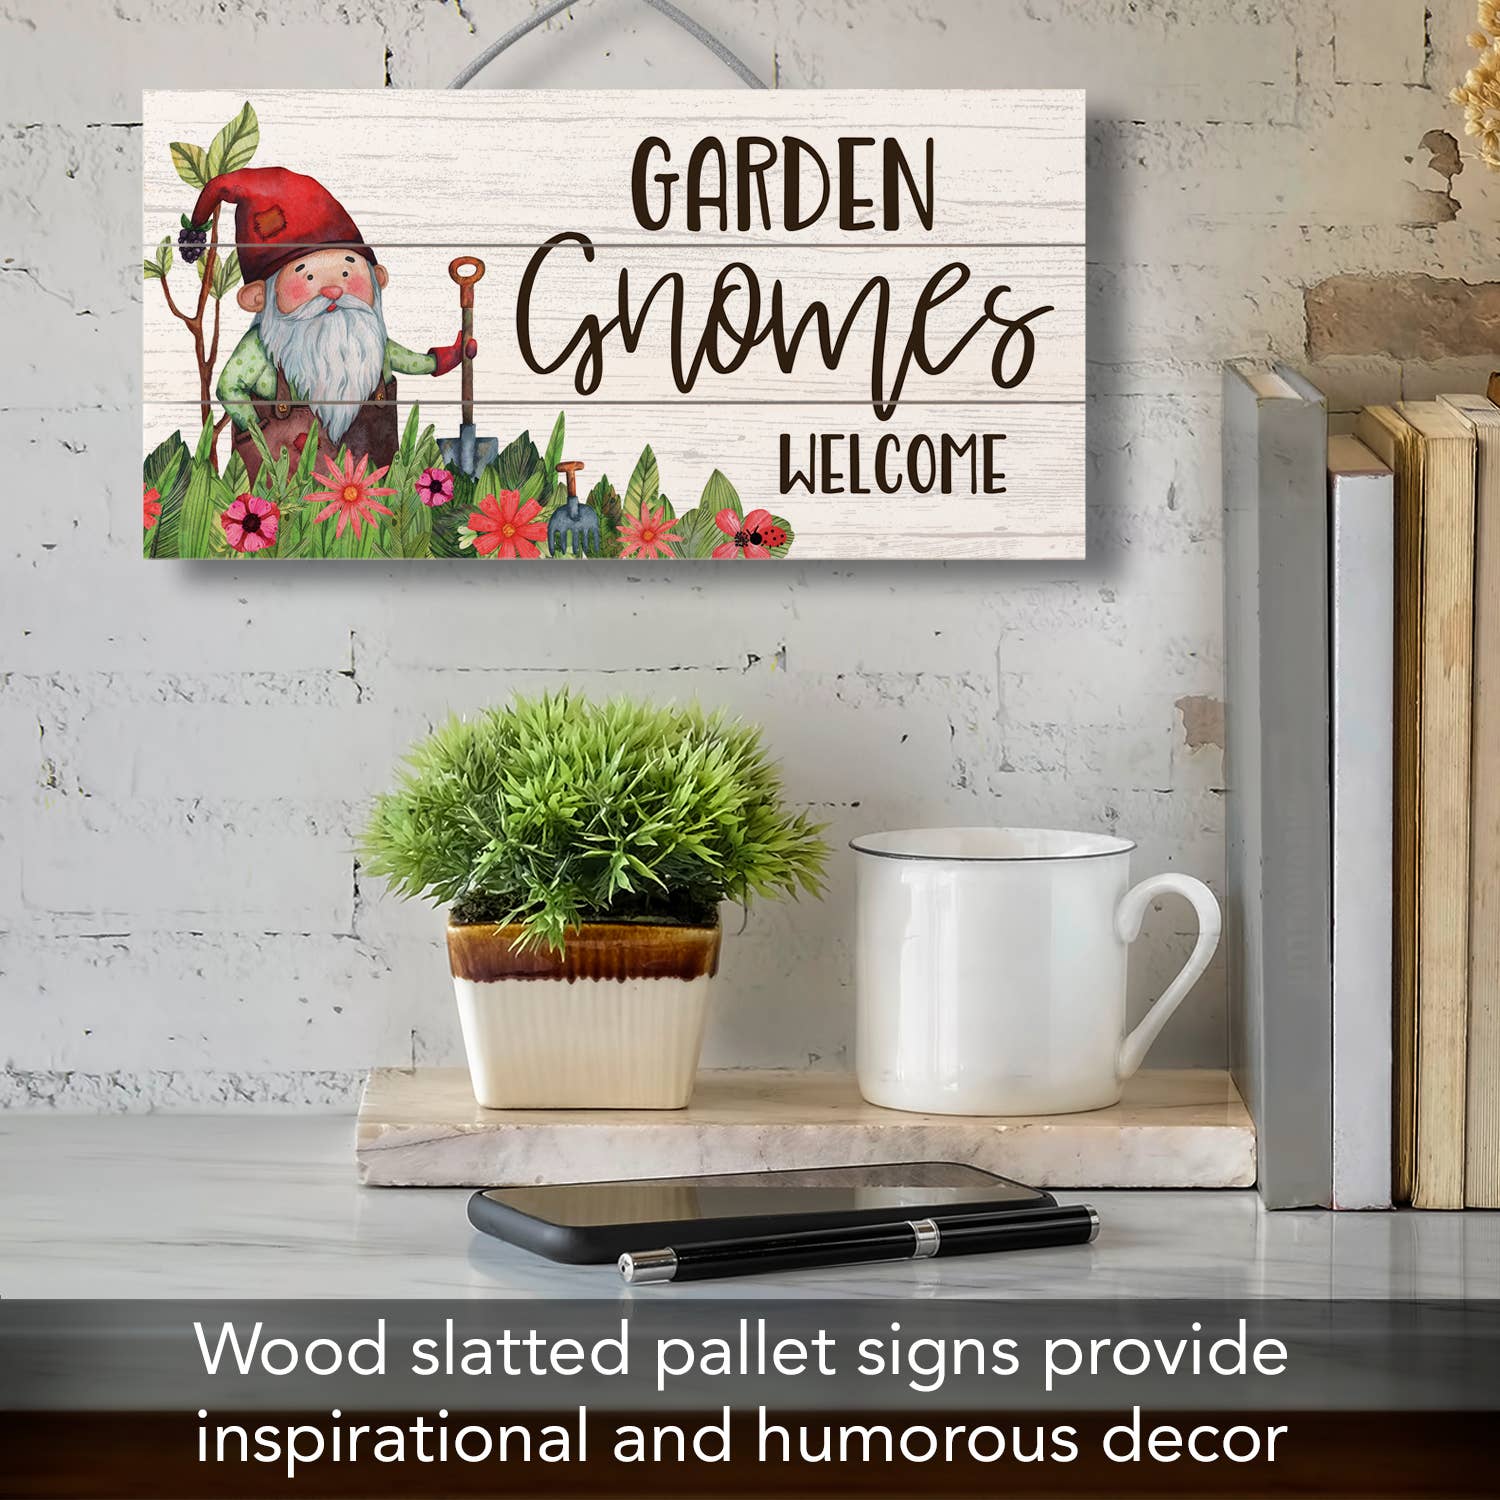 Sign: Garden Gnomes Decorative Slatted Pallet Wood Sign 12" by 6"